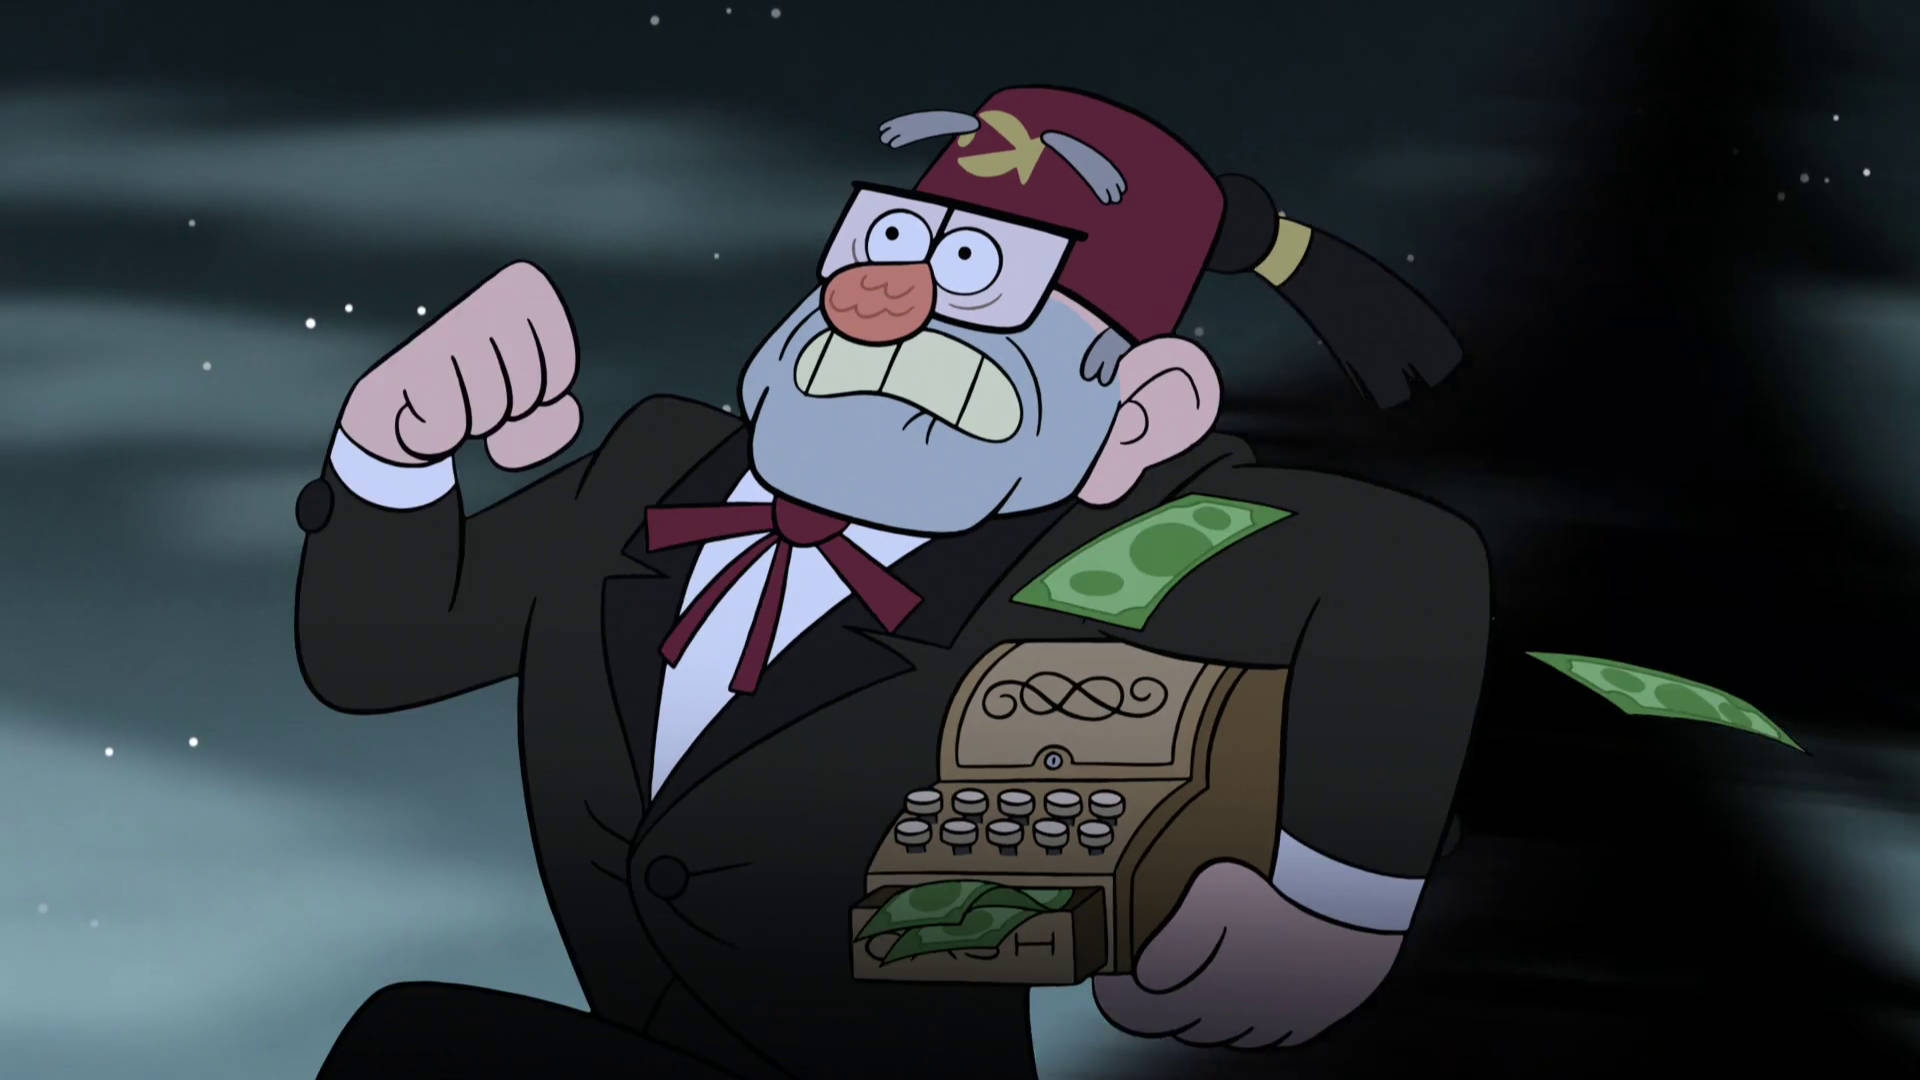 Grunkle Stan With Cash Register